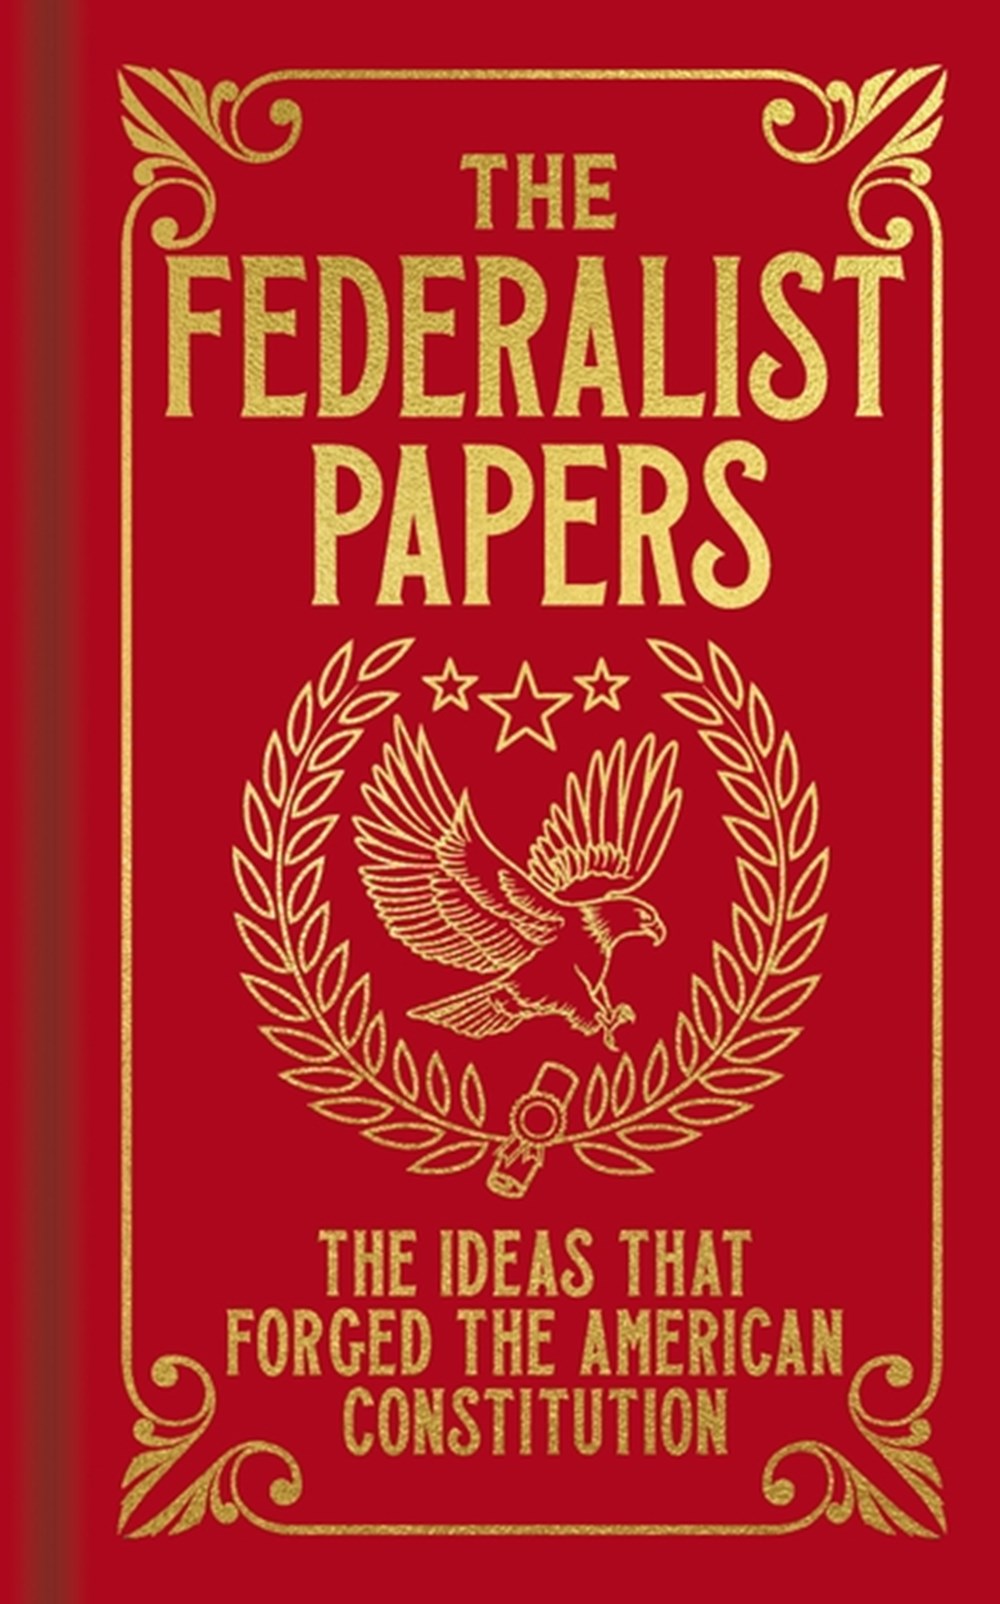 Federalist Papers: The Ideas That Forged the American Constitution